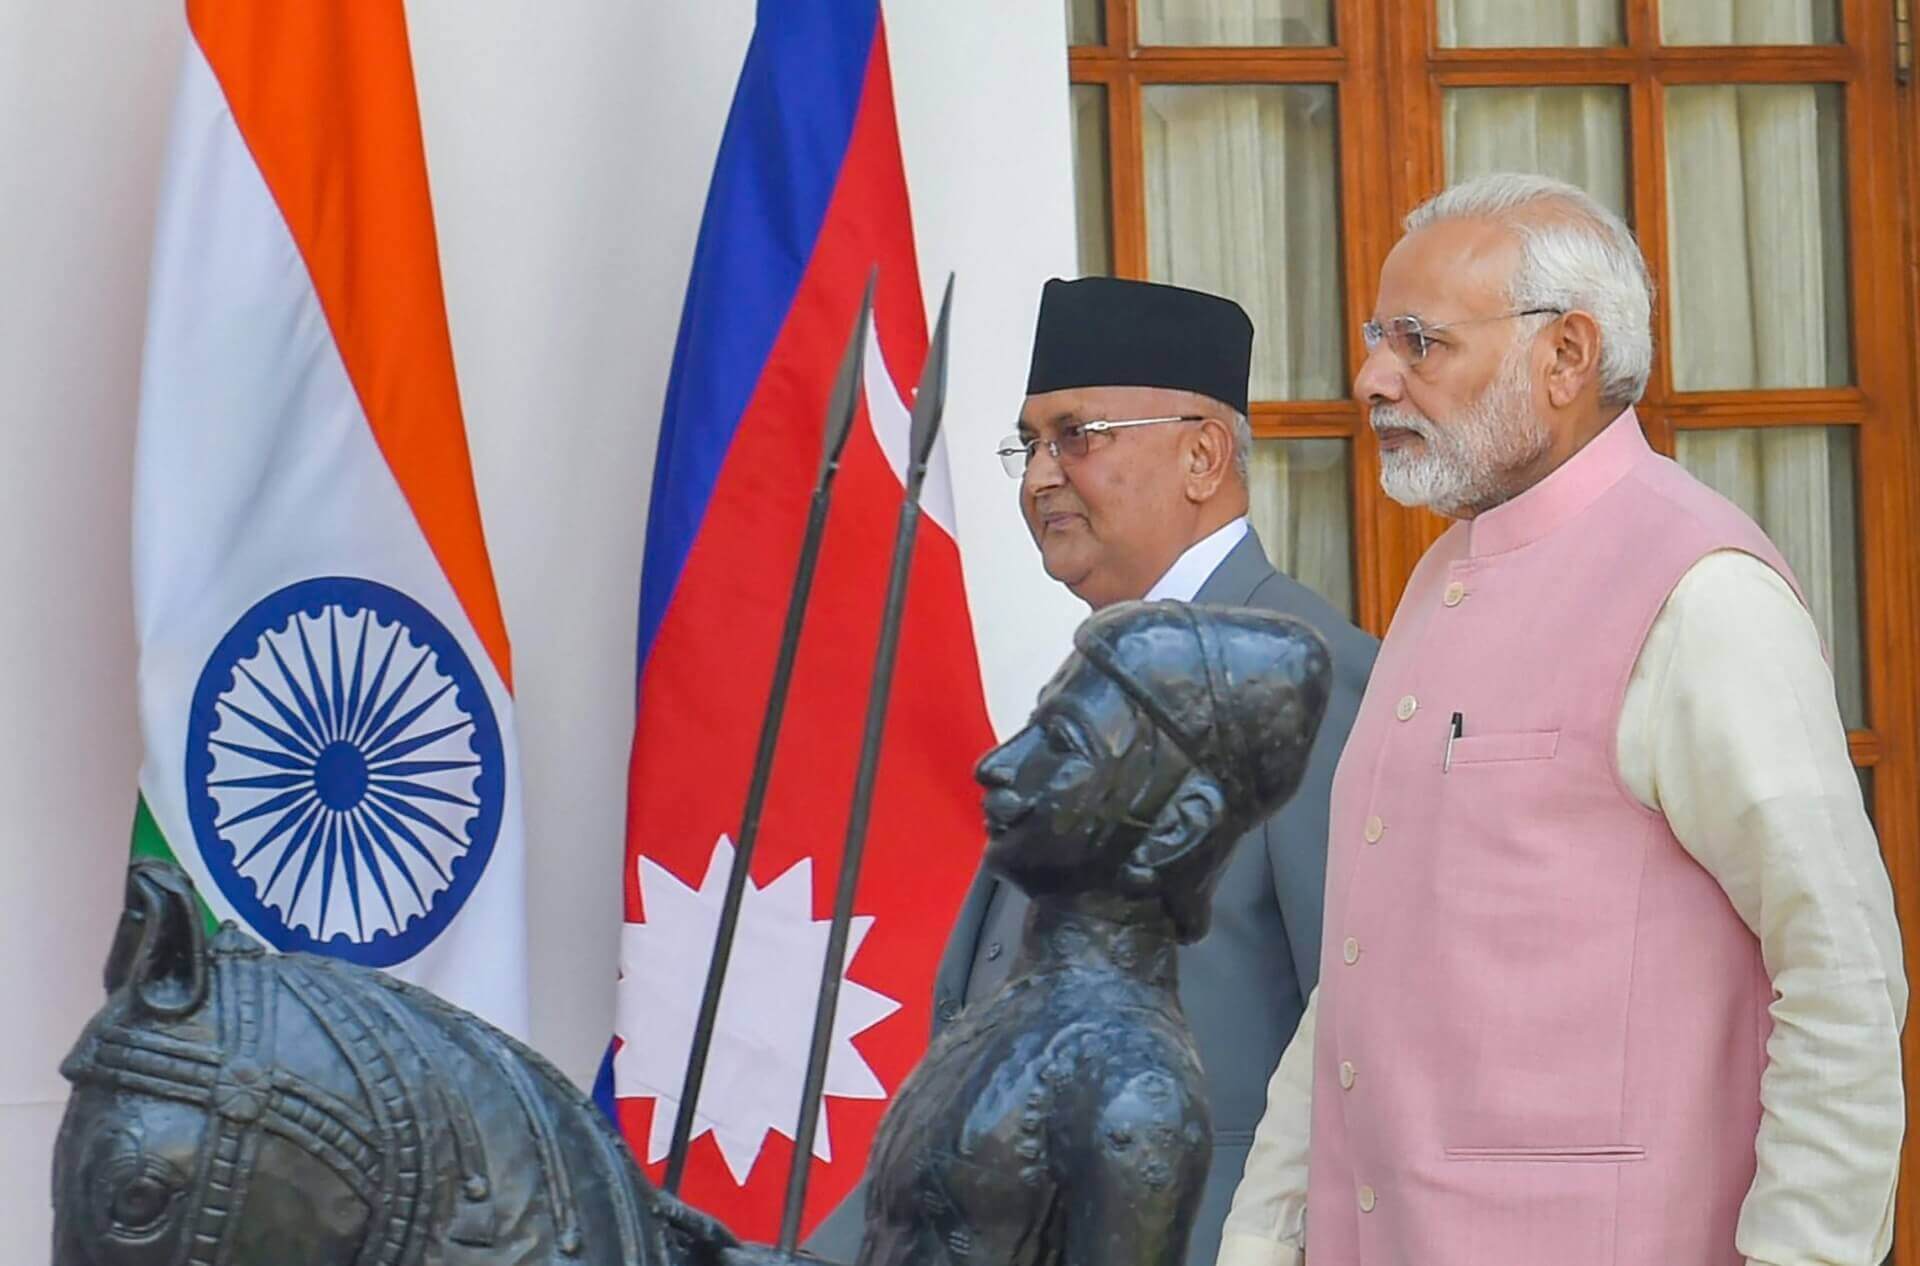 Nepal PM Promises to Reclaim Contested Land “At Any Cost”